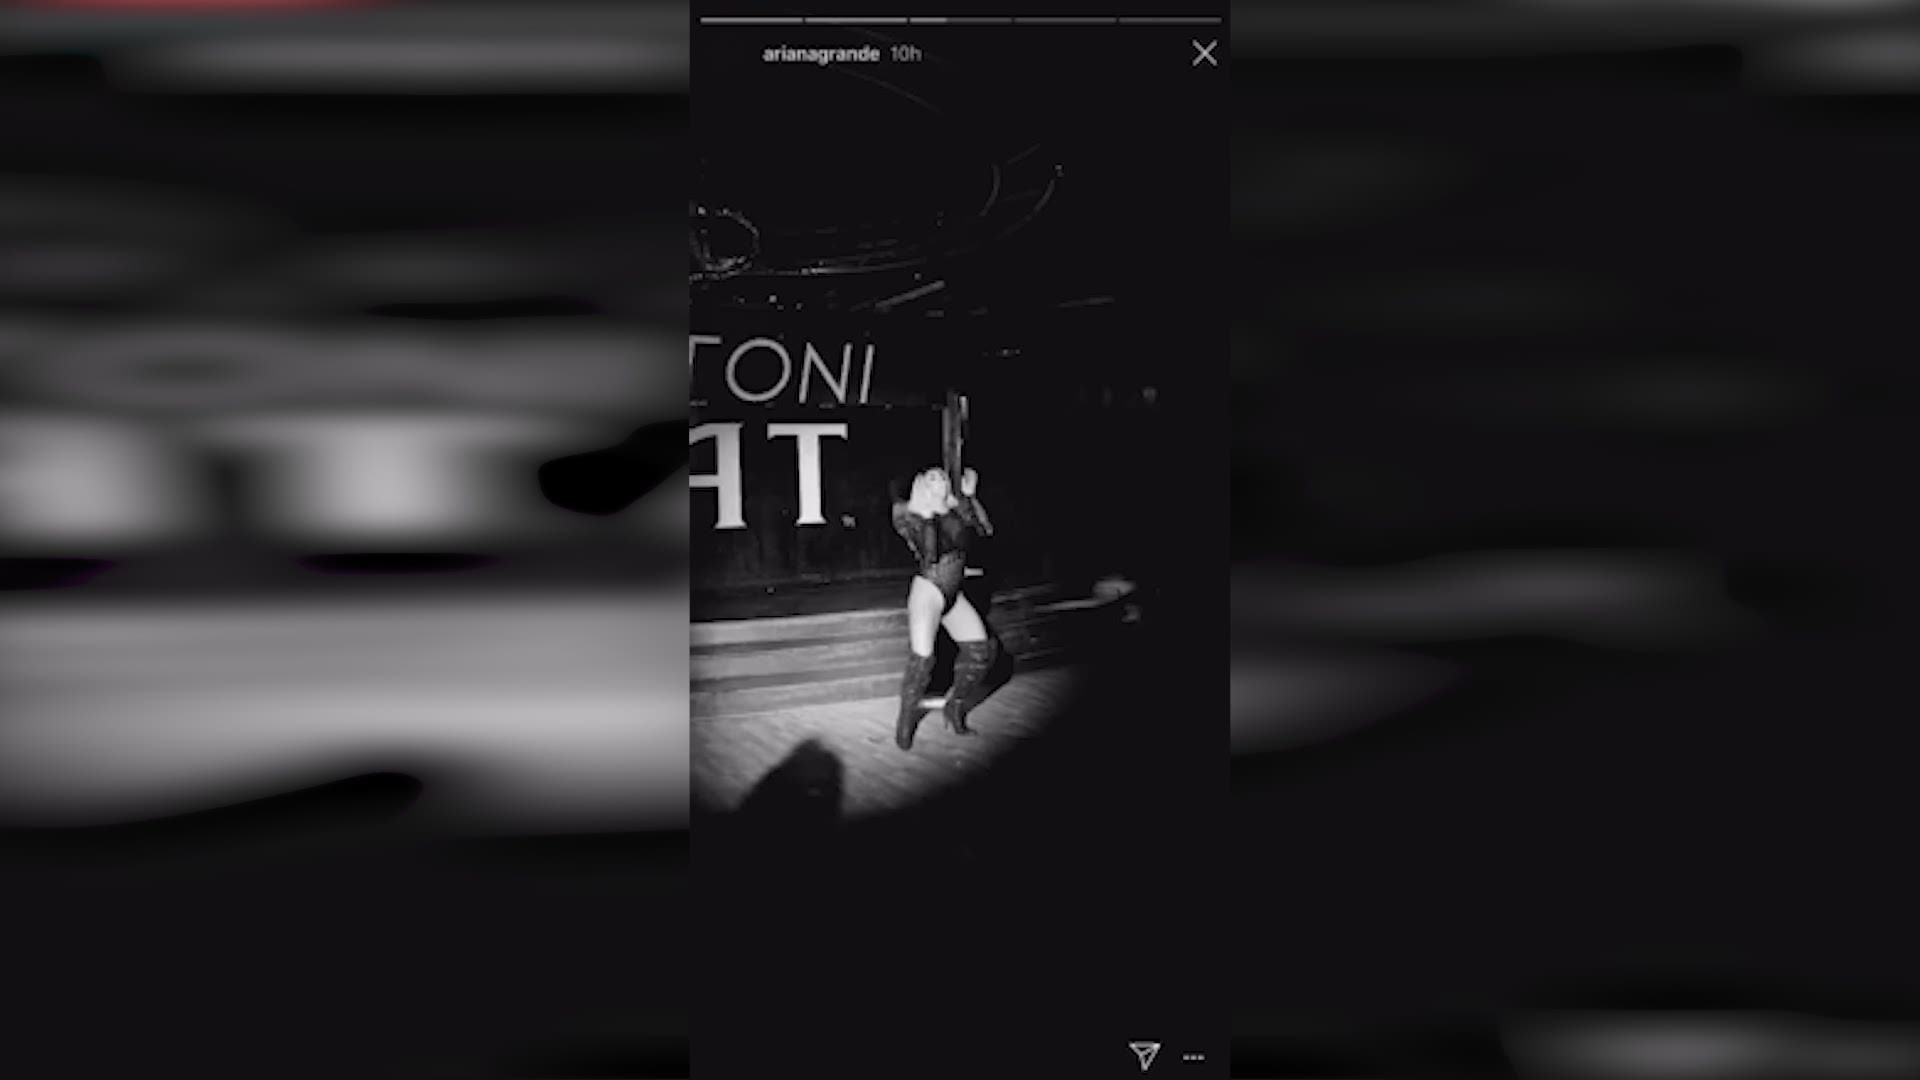 Ariana Grande shared clips from her night out in San Antonio. Grande stopped by the HEAT Nightclub ahead of her performance Friday night at the AT&T Center.